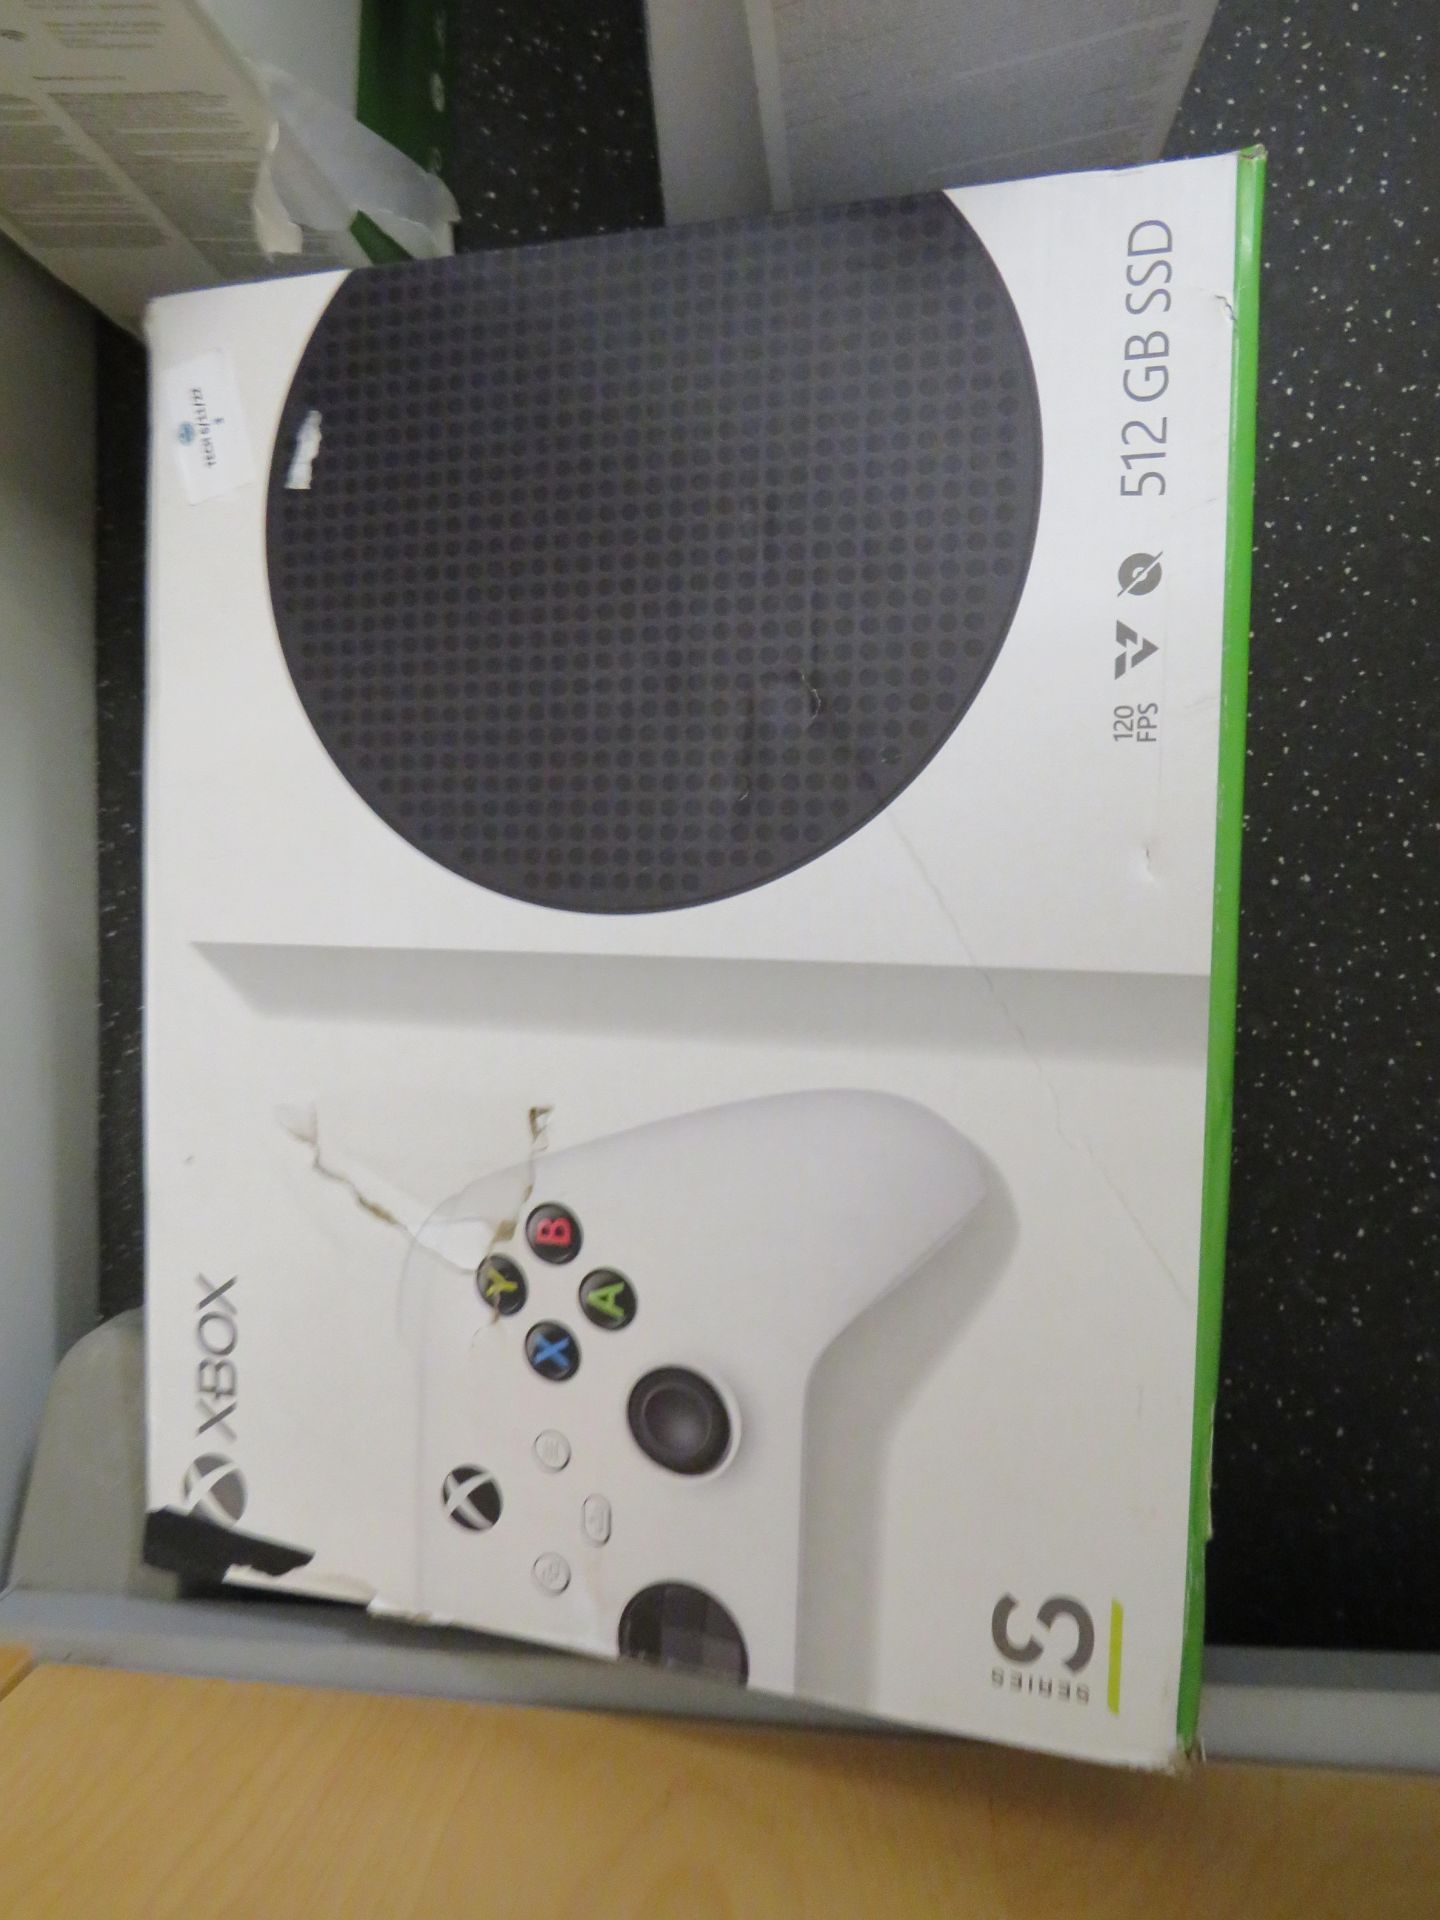 Xbox series S 512GB games console, comes with controller in original box, the unit powers on and